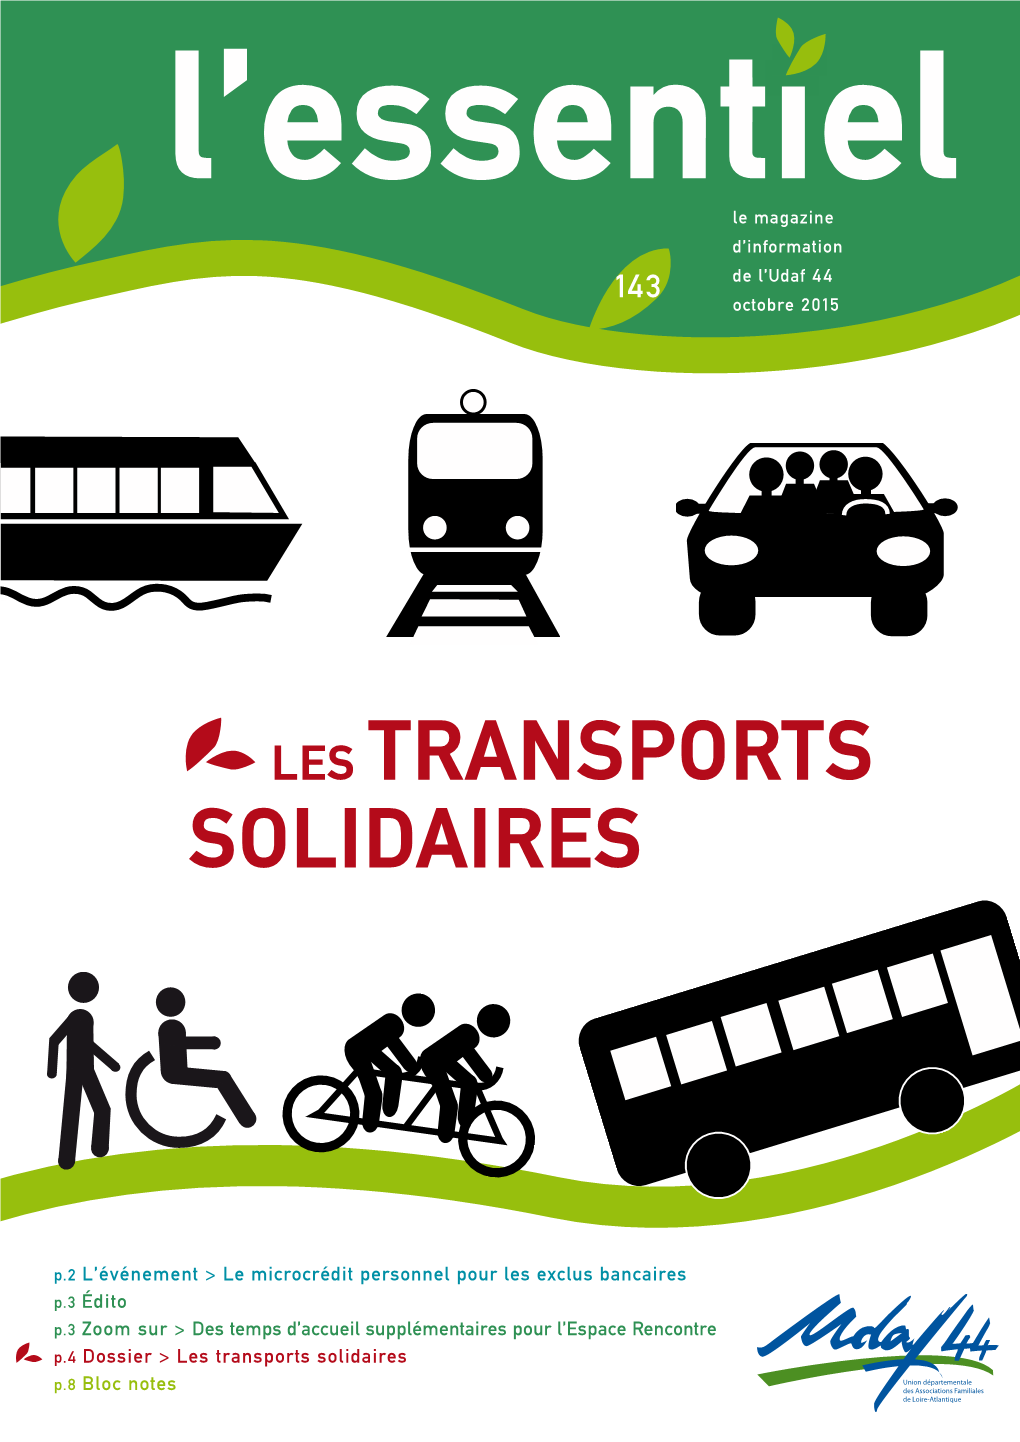 Les Transports Solidaires